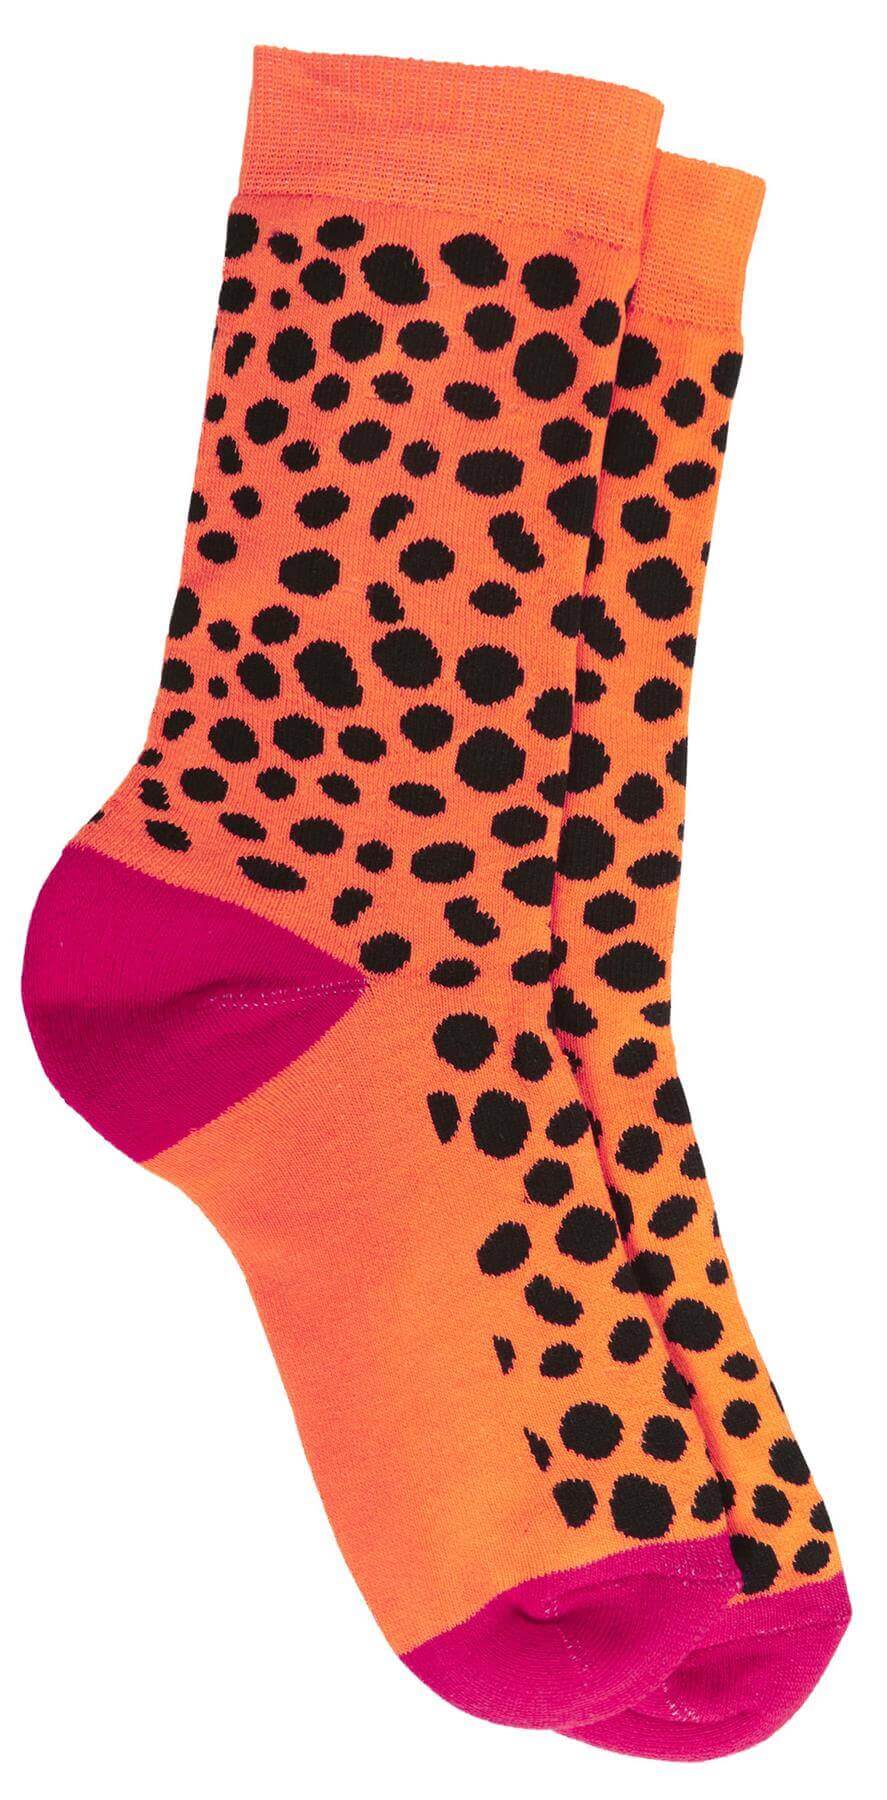 Pack of 6 Women's Animal Print Boot Socks, Summer Walking Hiking Sock Cotton Rich. Buy now for £7.00. A Socks by Sock Stack. 4-7, animal, anti bacterial, anti blister, assorted, boot, breathable, brown, comfortable, cycling, designing, dress socks, footwe